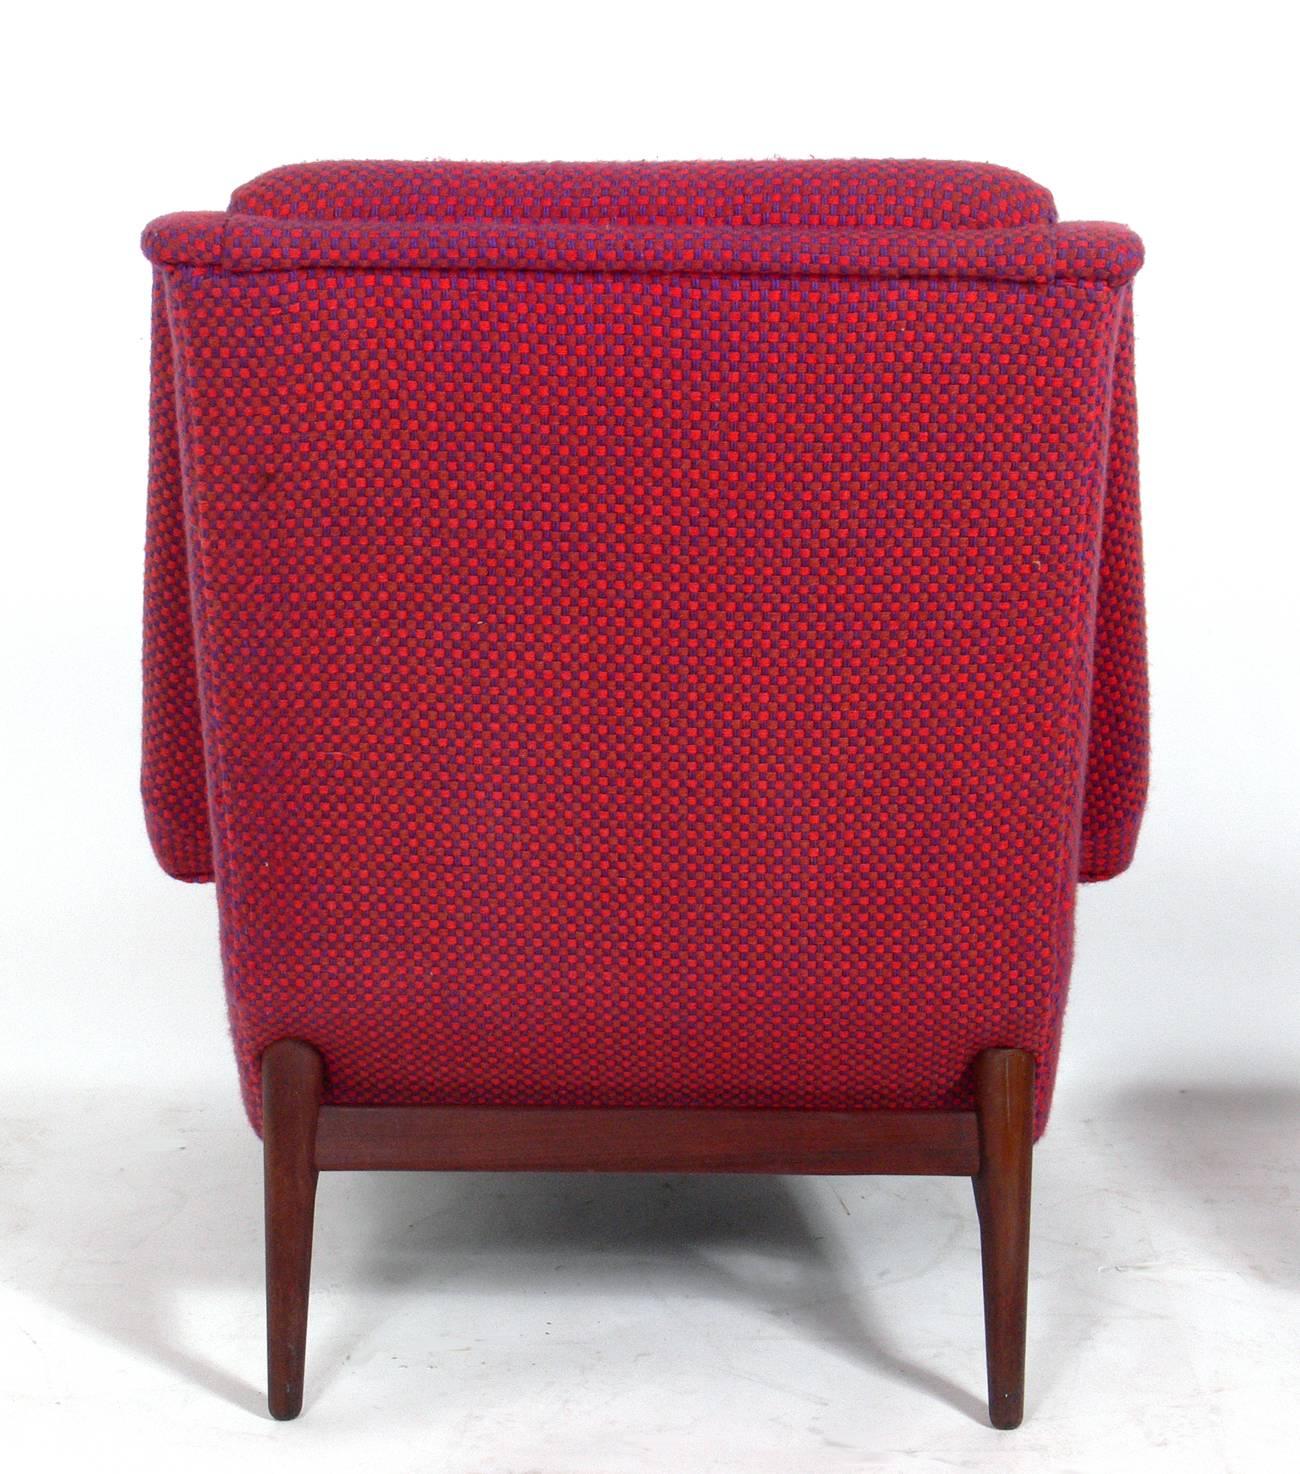 Mid-20th Century Danish Modern Lounge Chair and Ottoman Attributed to Folke Ohlsson